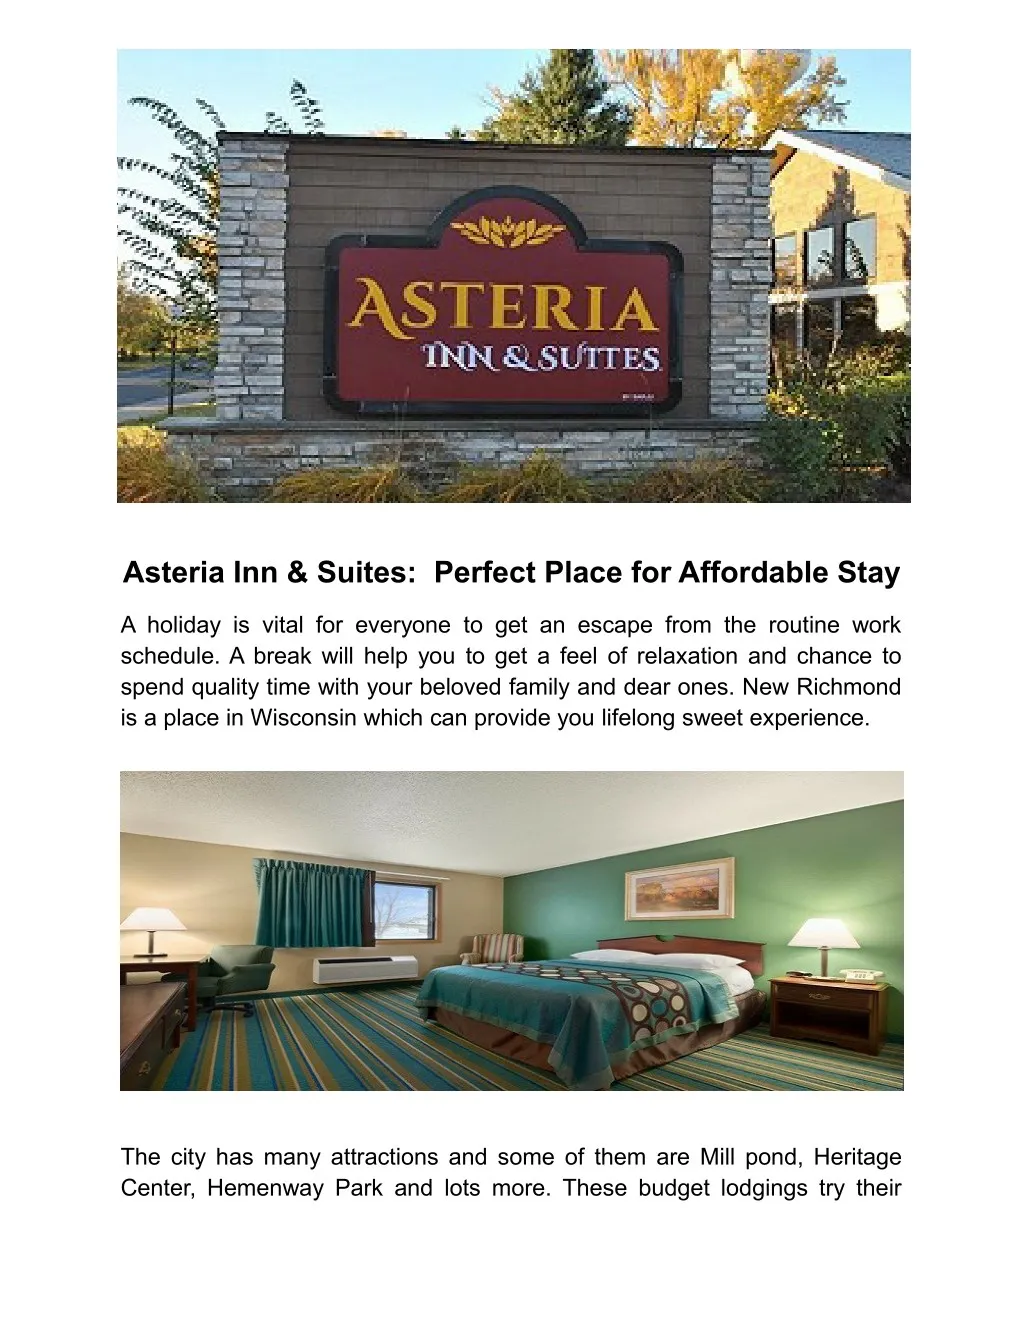 asteria inn suites perfect place for affordable